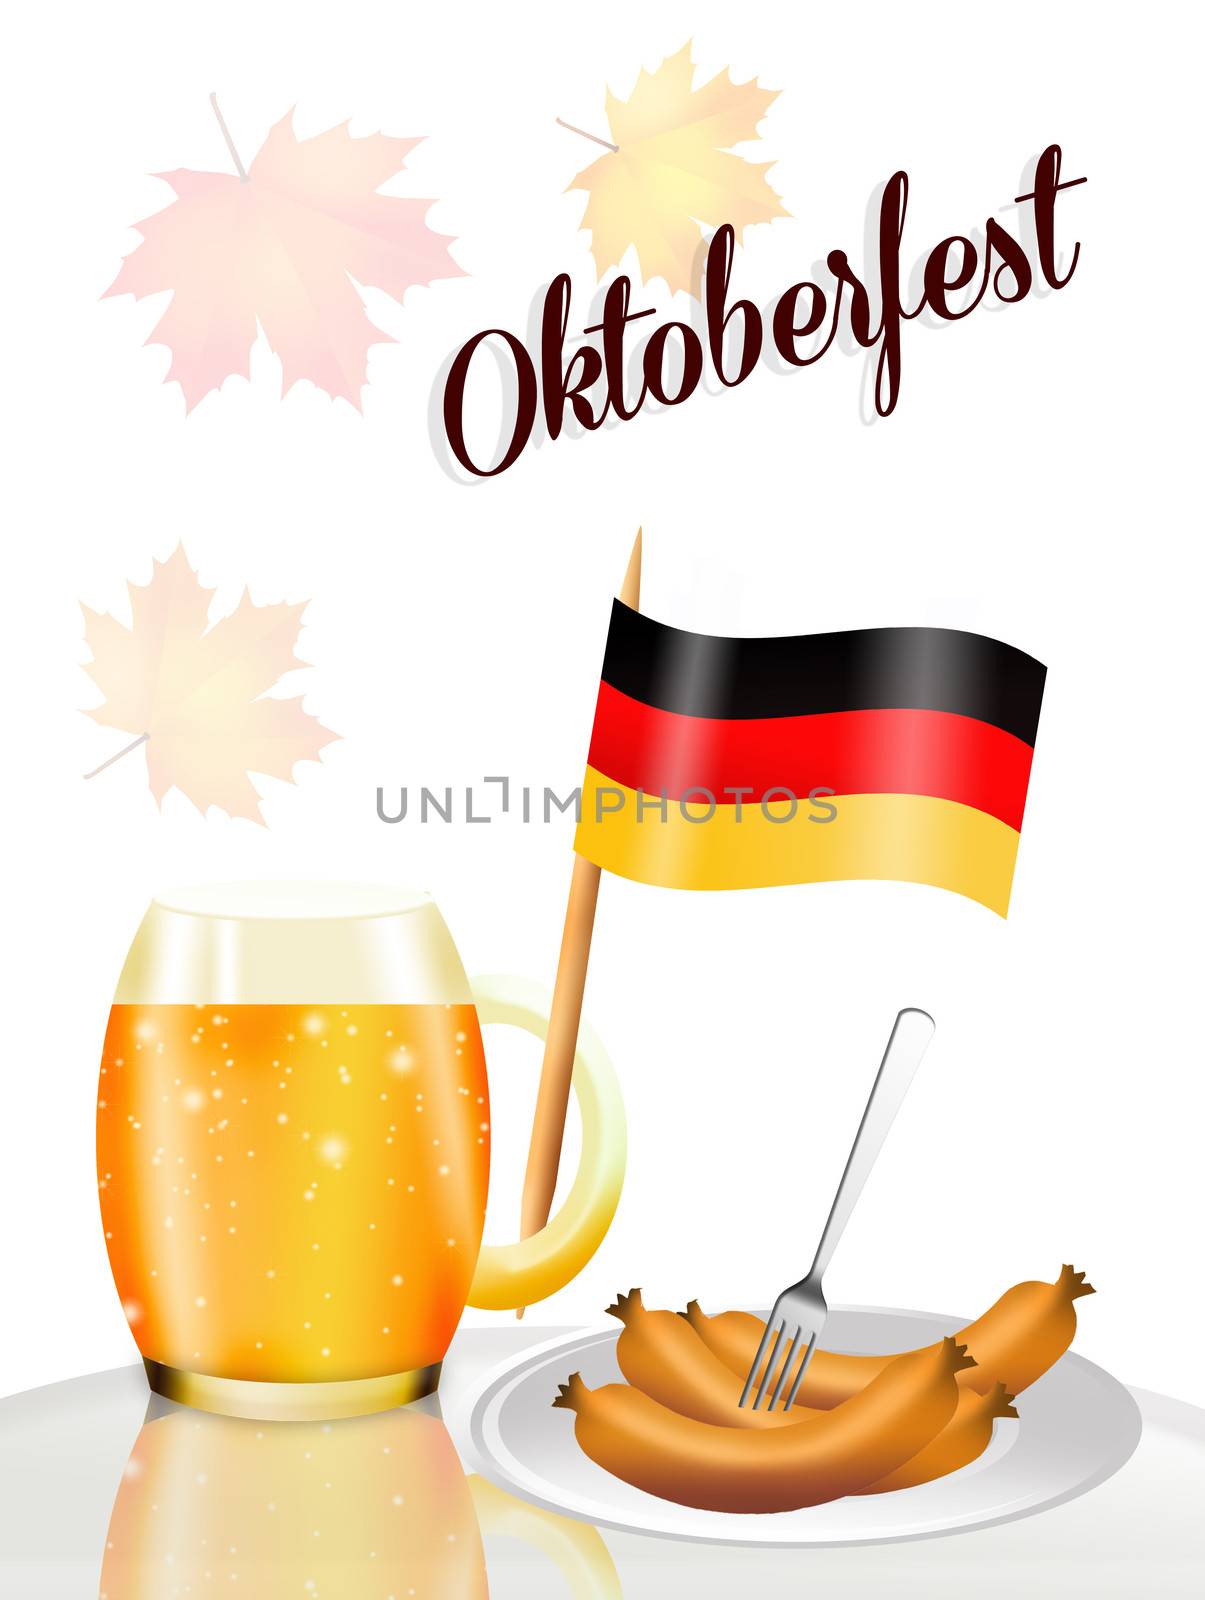 Oktoberfest beer and sausages